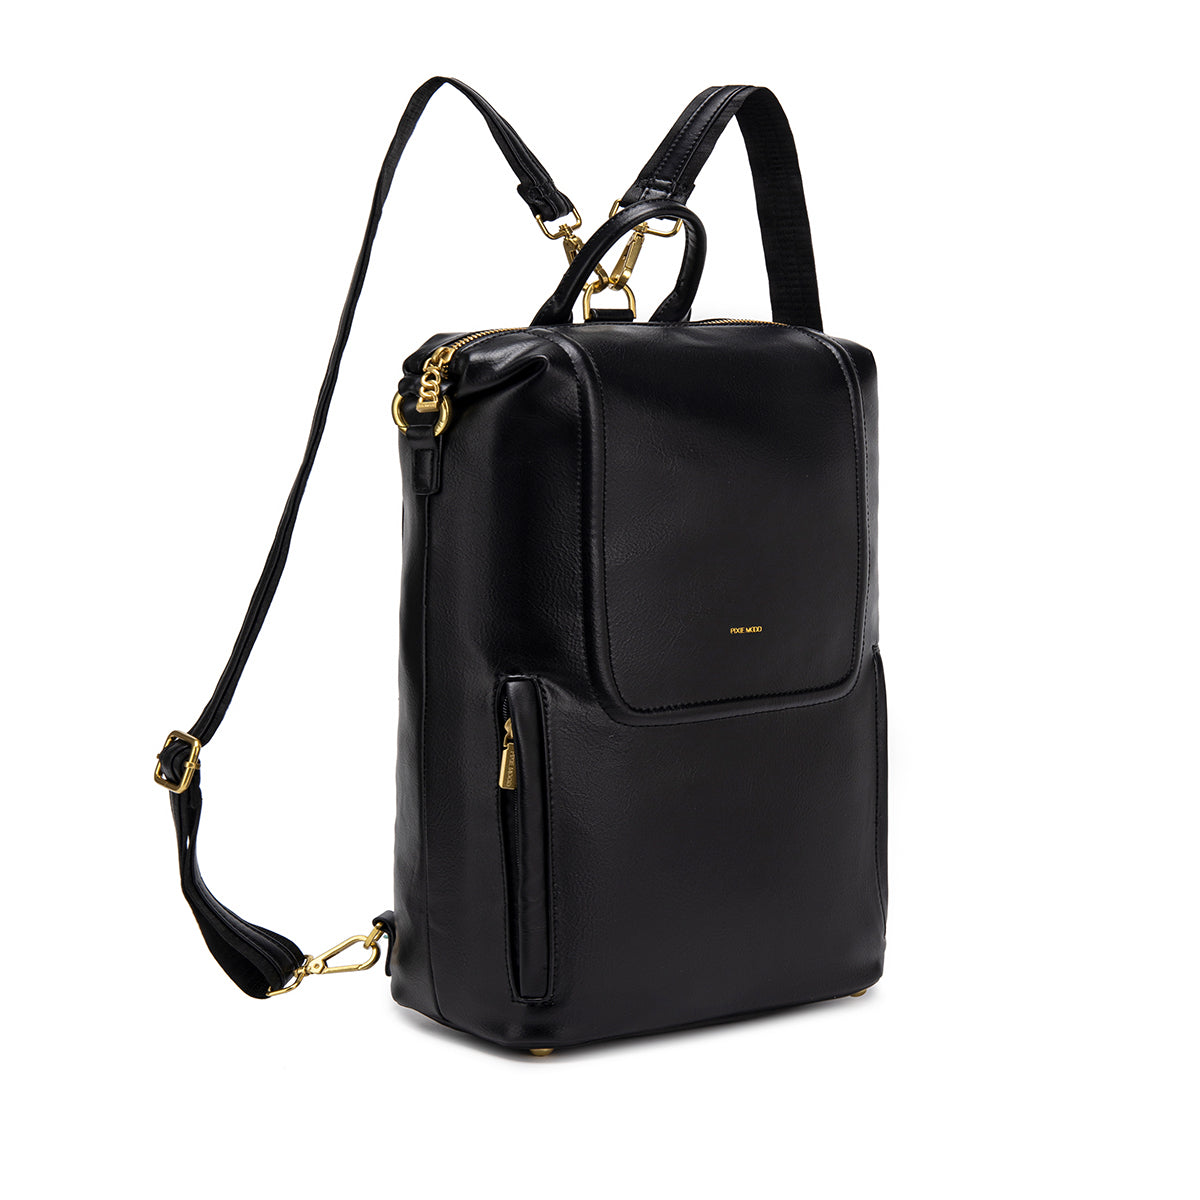 Blossom Small Backpack - Black